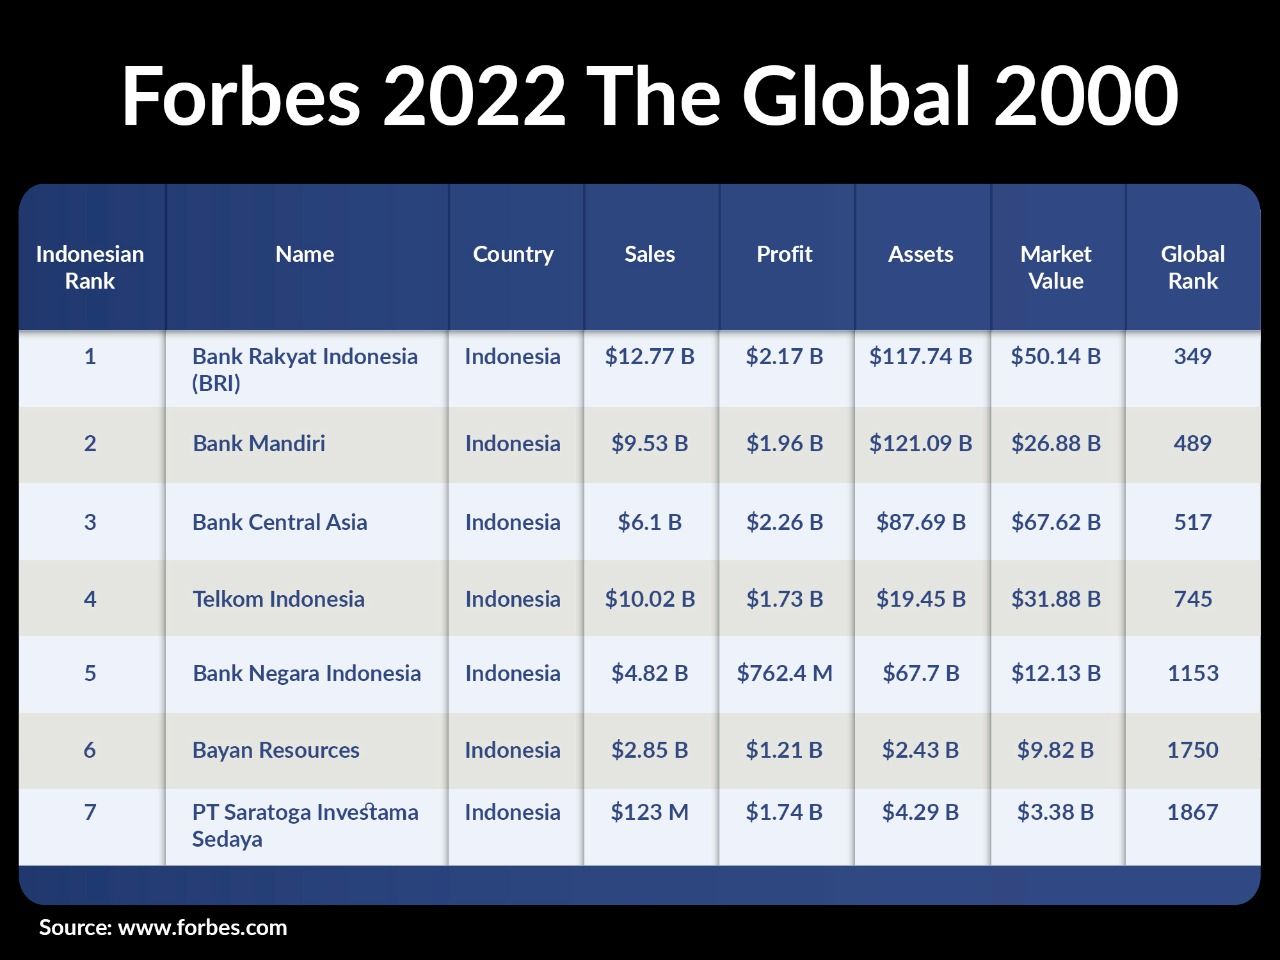 Forbes 20022 The global 2000